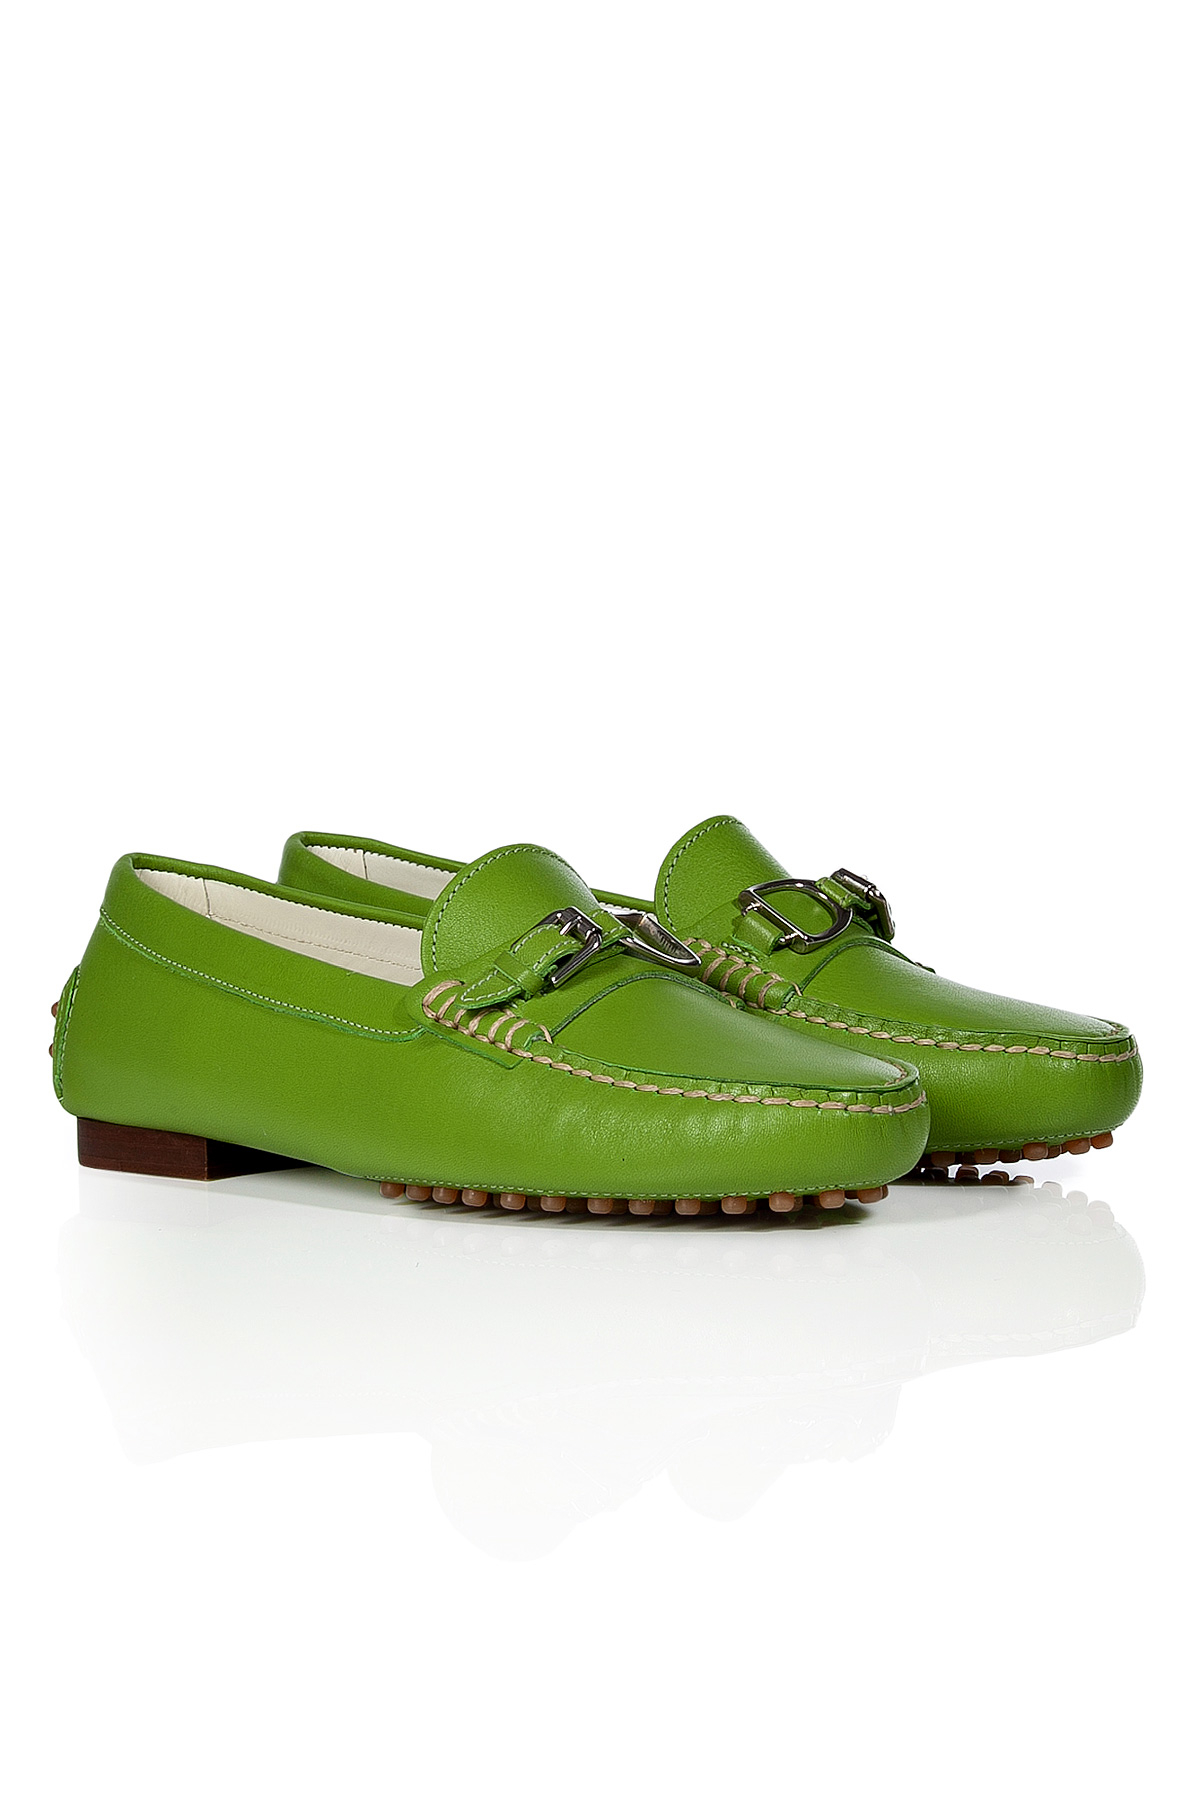 Lyst - Ralph Lauren Collection Kiwi Leather Dasita Loafers in Green